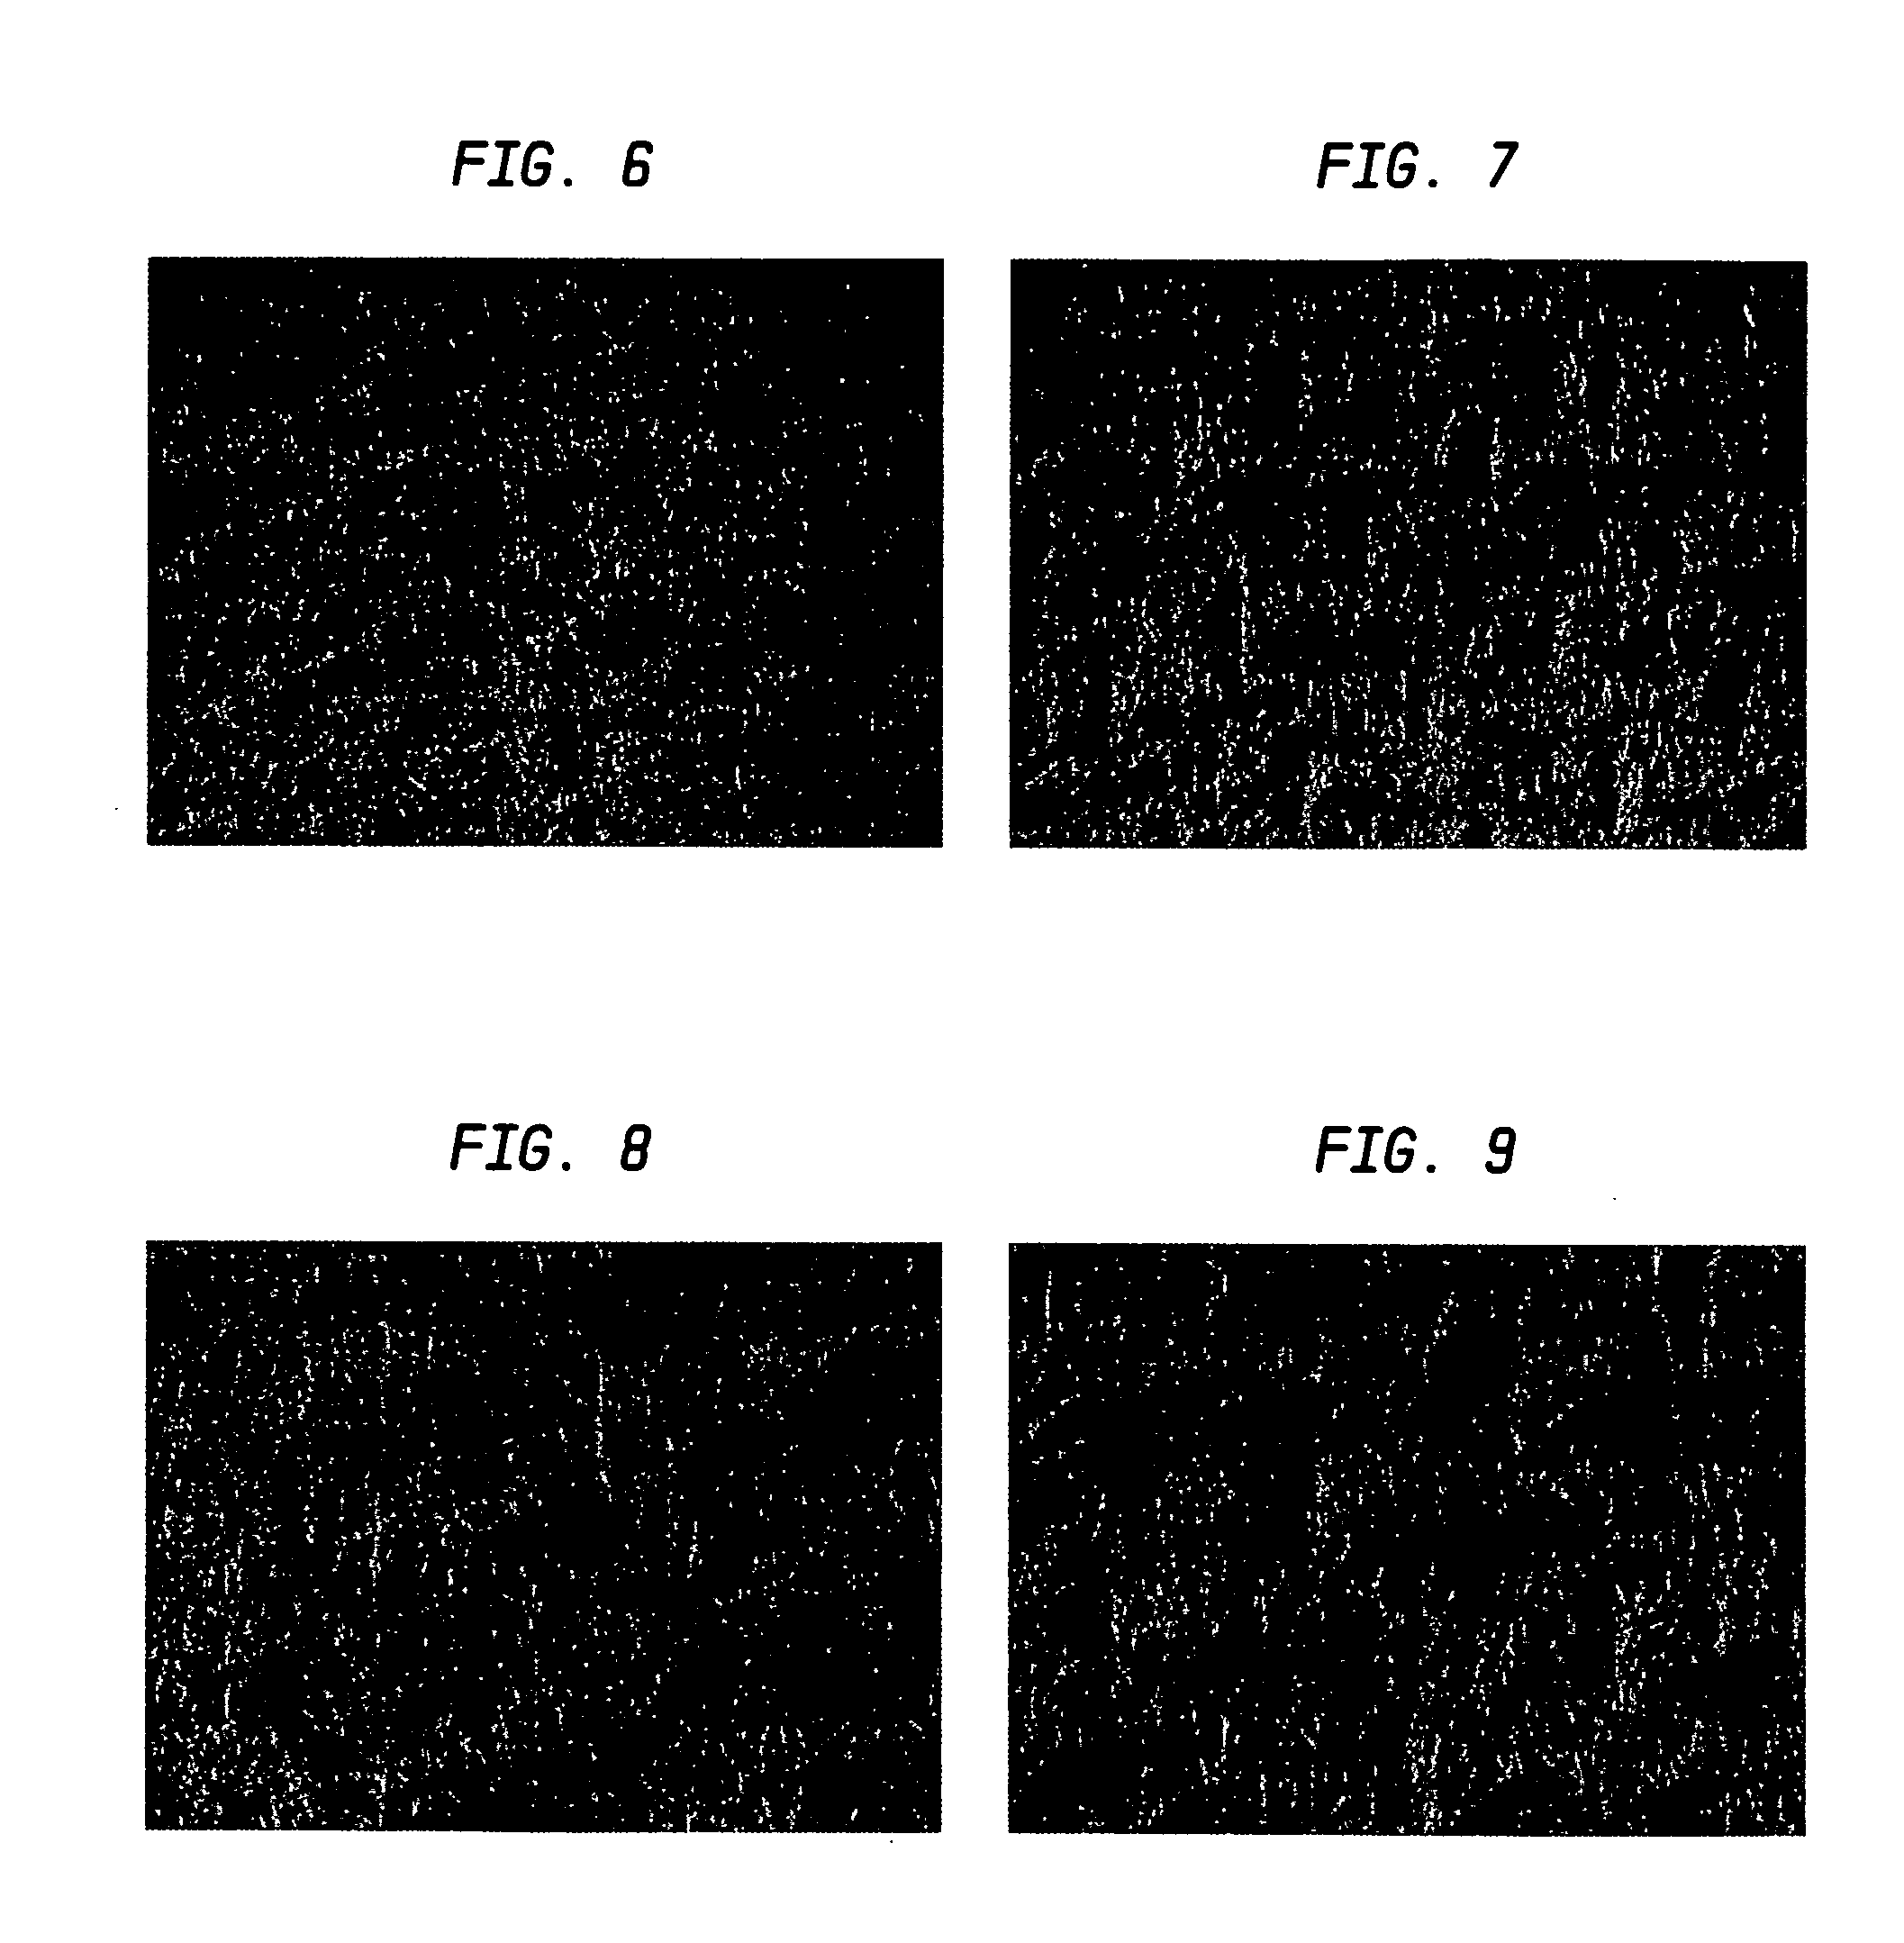 Method of making fabric-creped sheet for dispensers